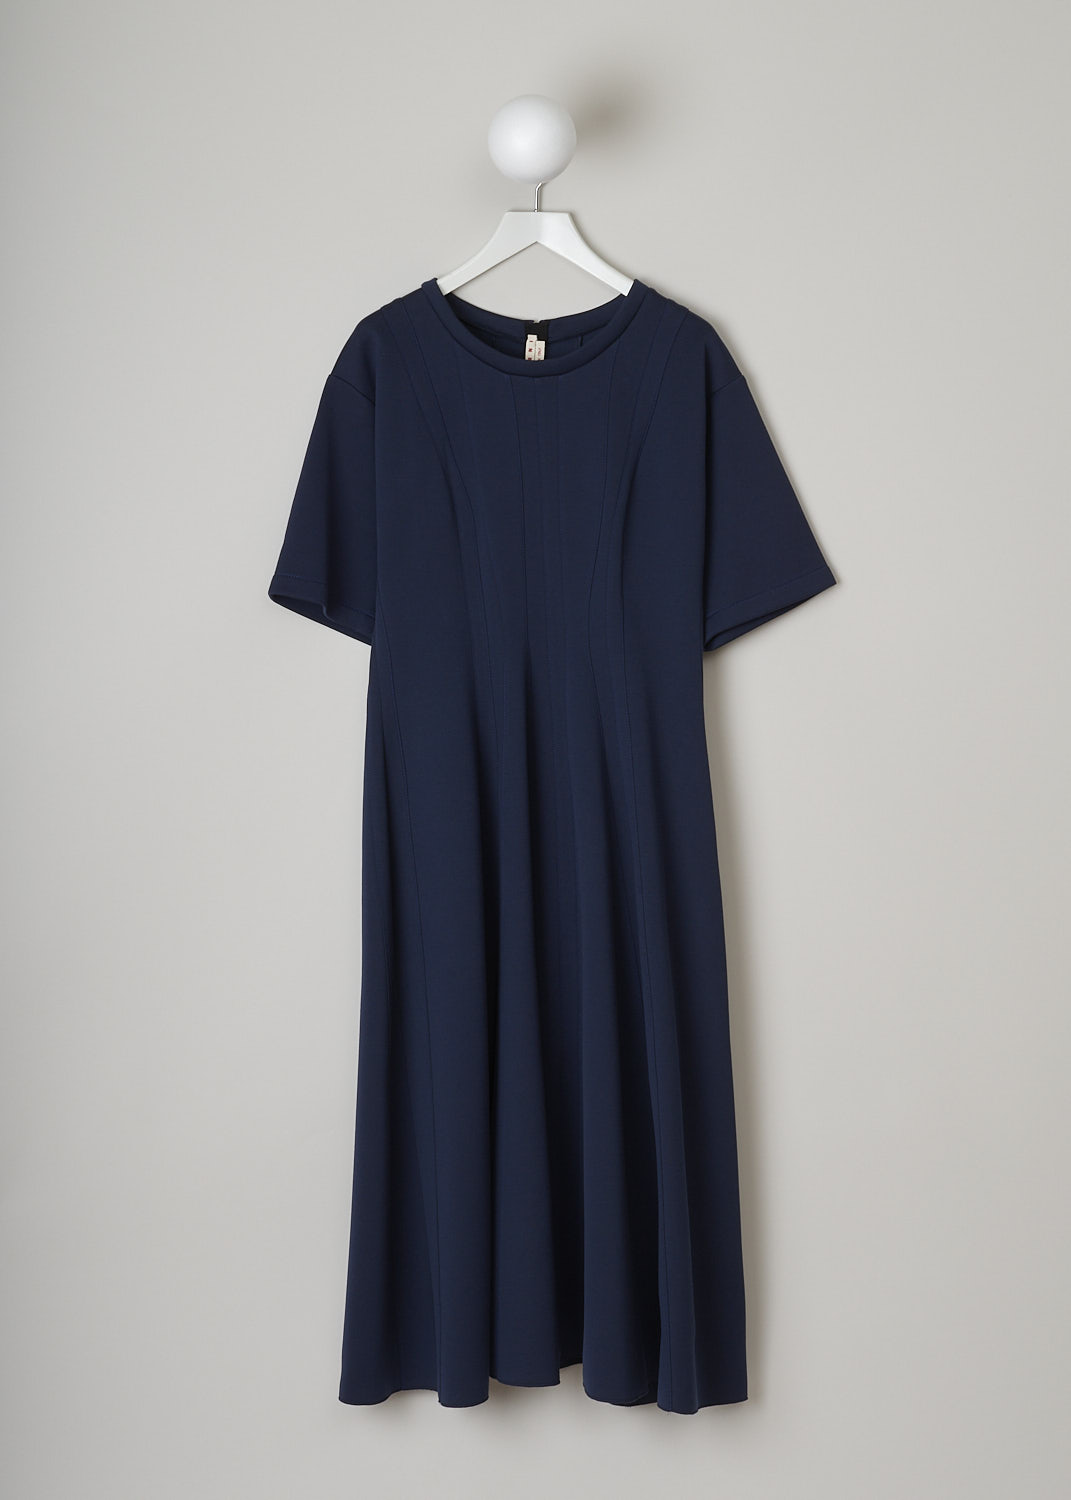 MARNI, NAVY BLUE JERSEY MAXI DRESS, ABJE0877A0_TCY52_00B80, Blue, Front, This navy blue jersey maxi dress has a crewneck and short sleeves. This fit-and-flare dress has exposed darts that run vertically along the length of the dress. In the back, a concealed centre zip functions as the closure option.  
